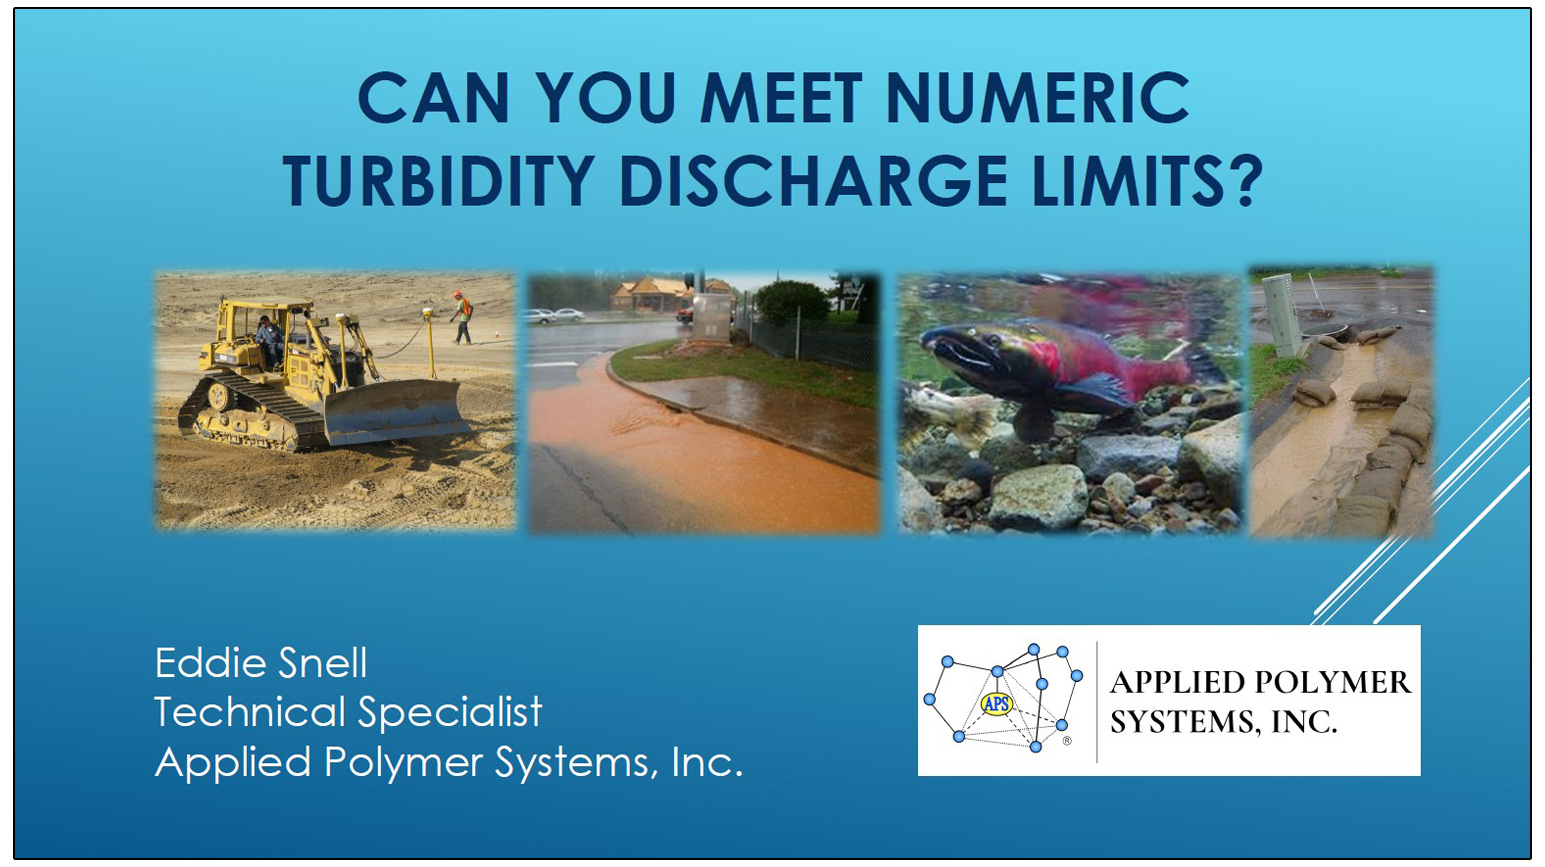 Can You Meet Numberic Turbidity Discharge Limits - presentation by Eddie Snell